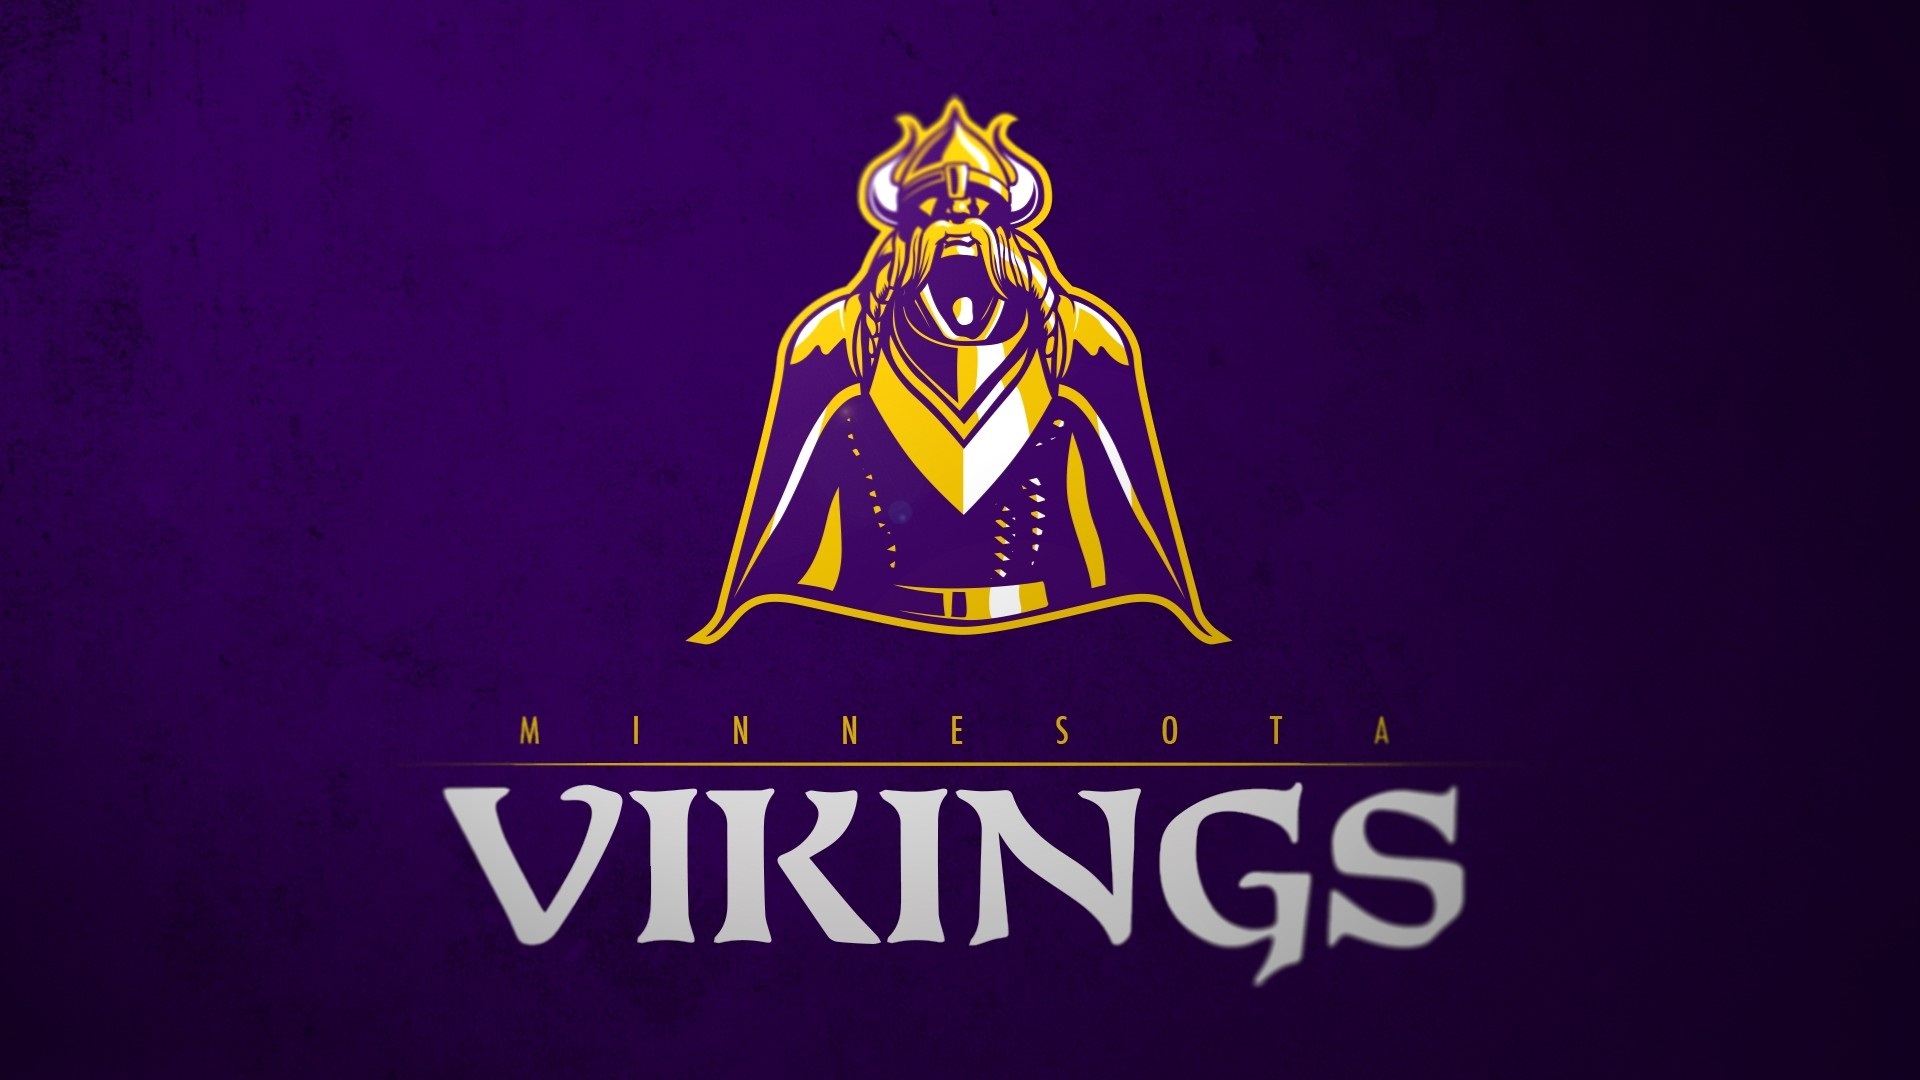 Minnesota Vikings Desktop Wallpaper with resolution 1920x1080 pixel. You can make this wallpaper for your Mac or Windows Desktop Background, iPhone, Android or Tablet and another Smartphone device